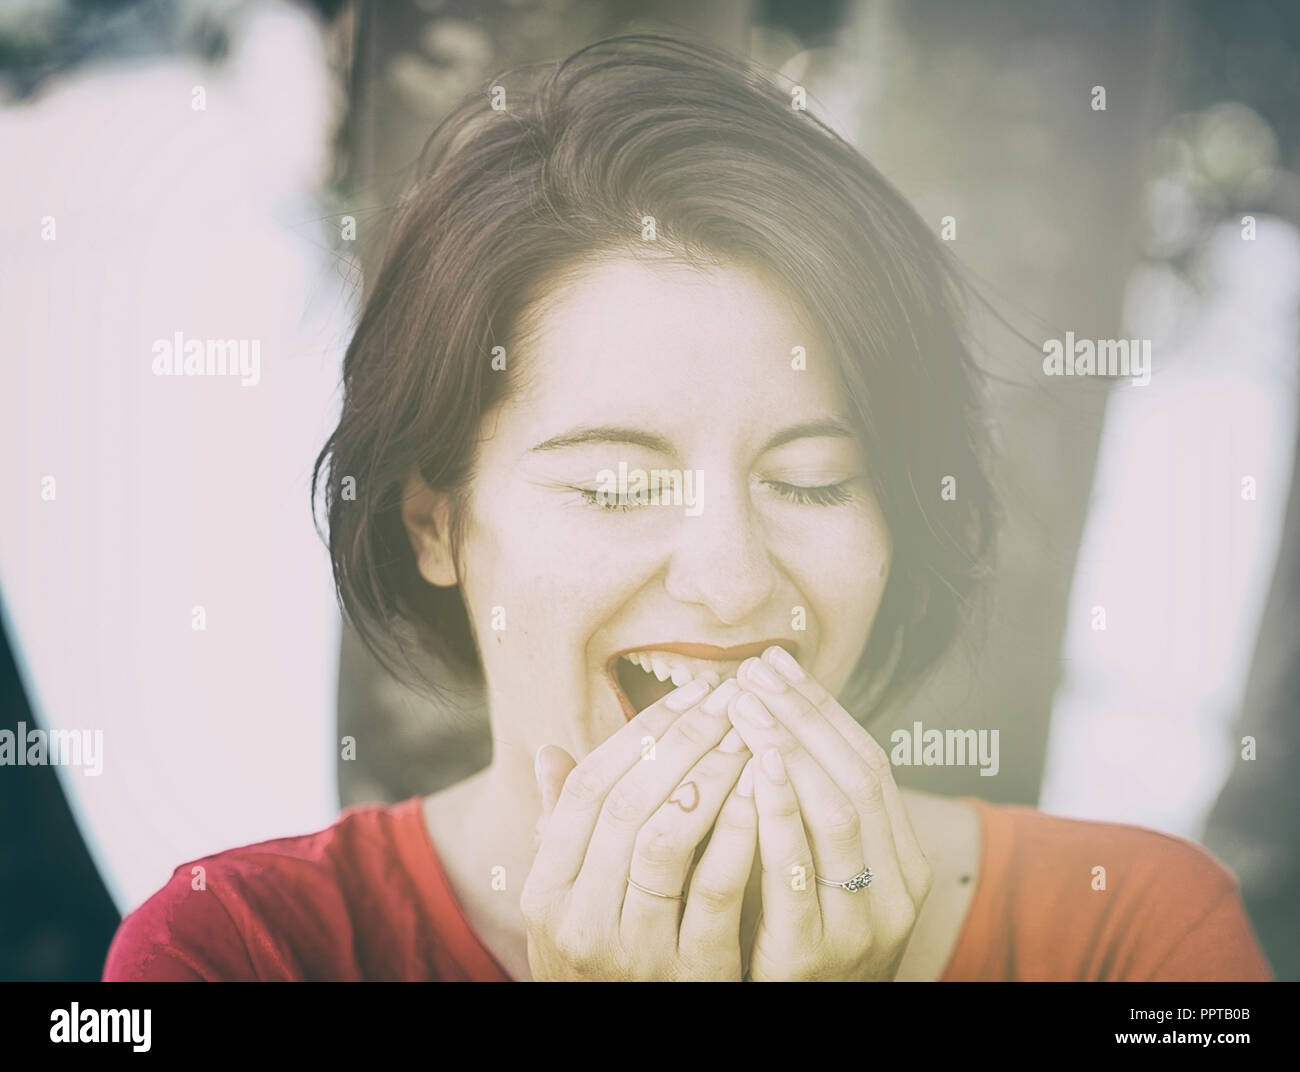 woman laughing Stock Photo